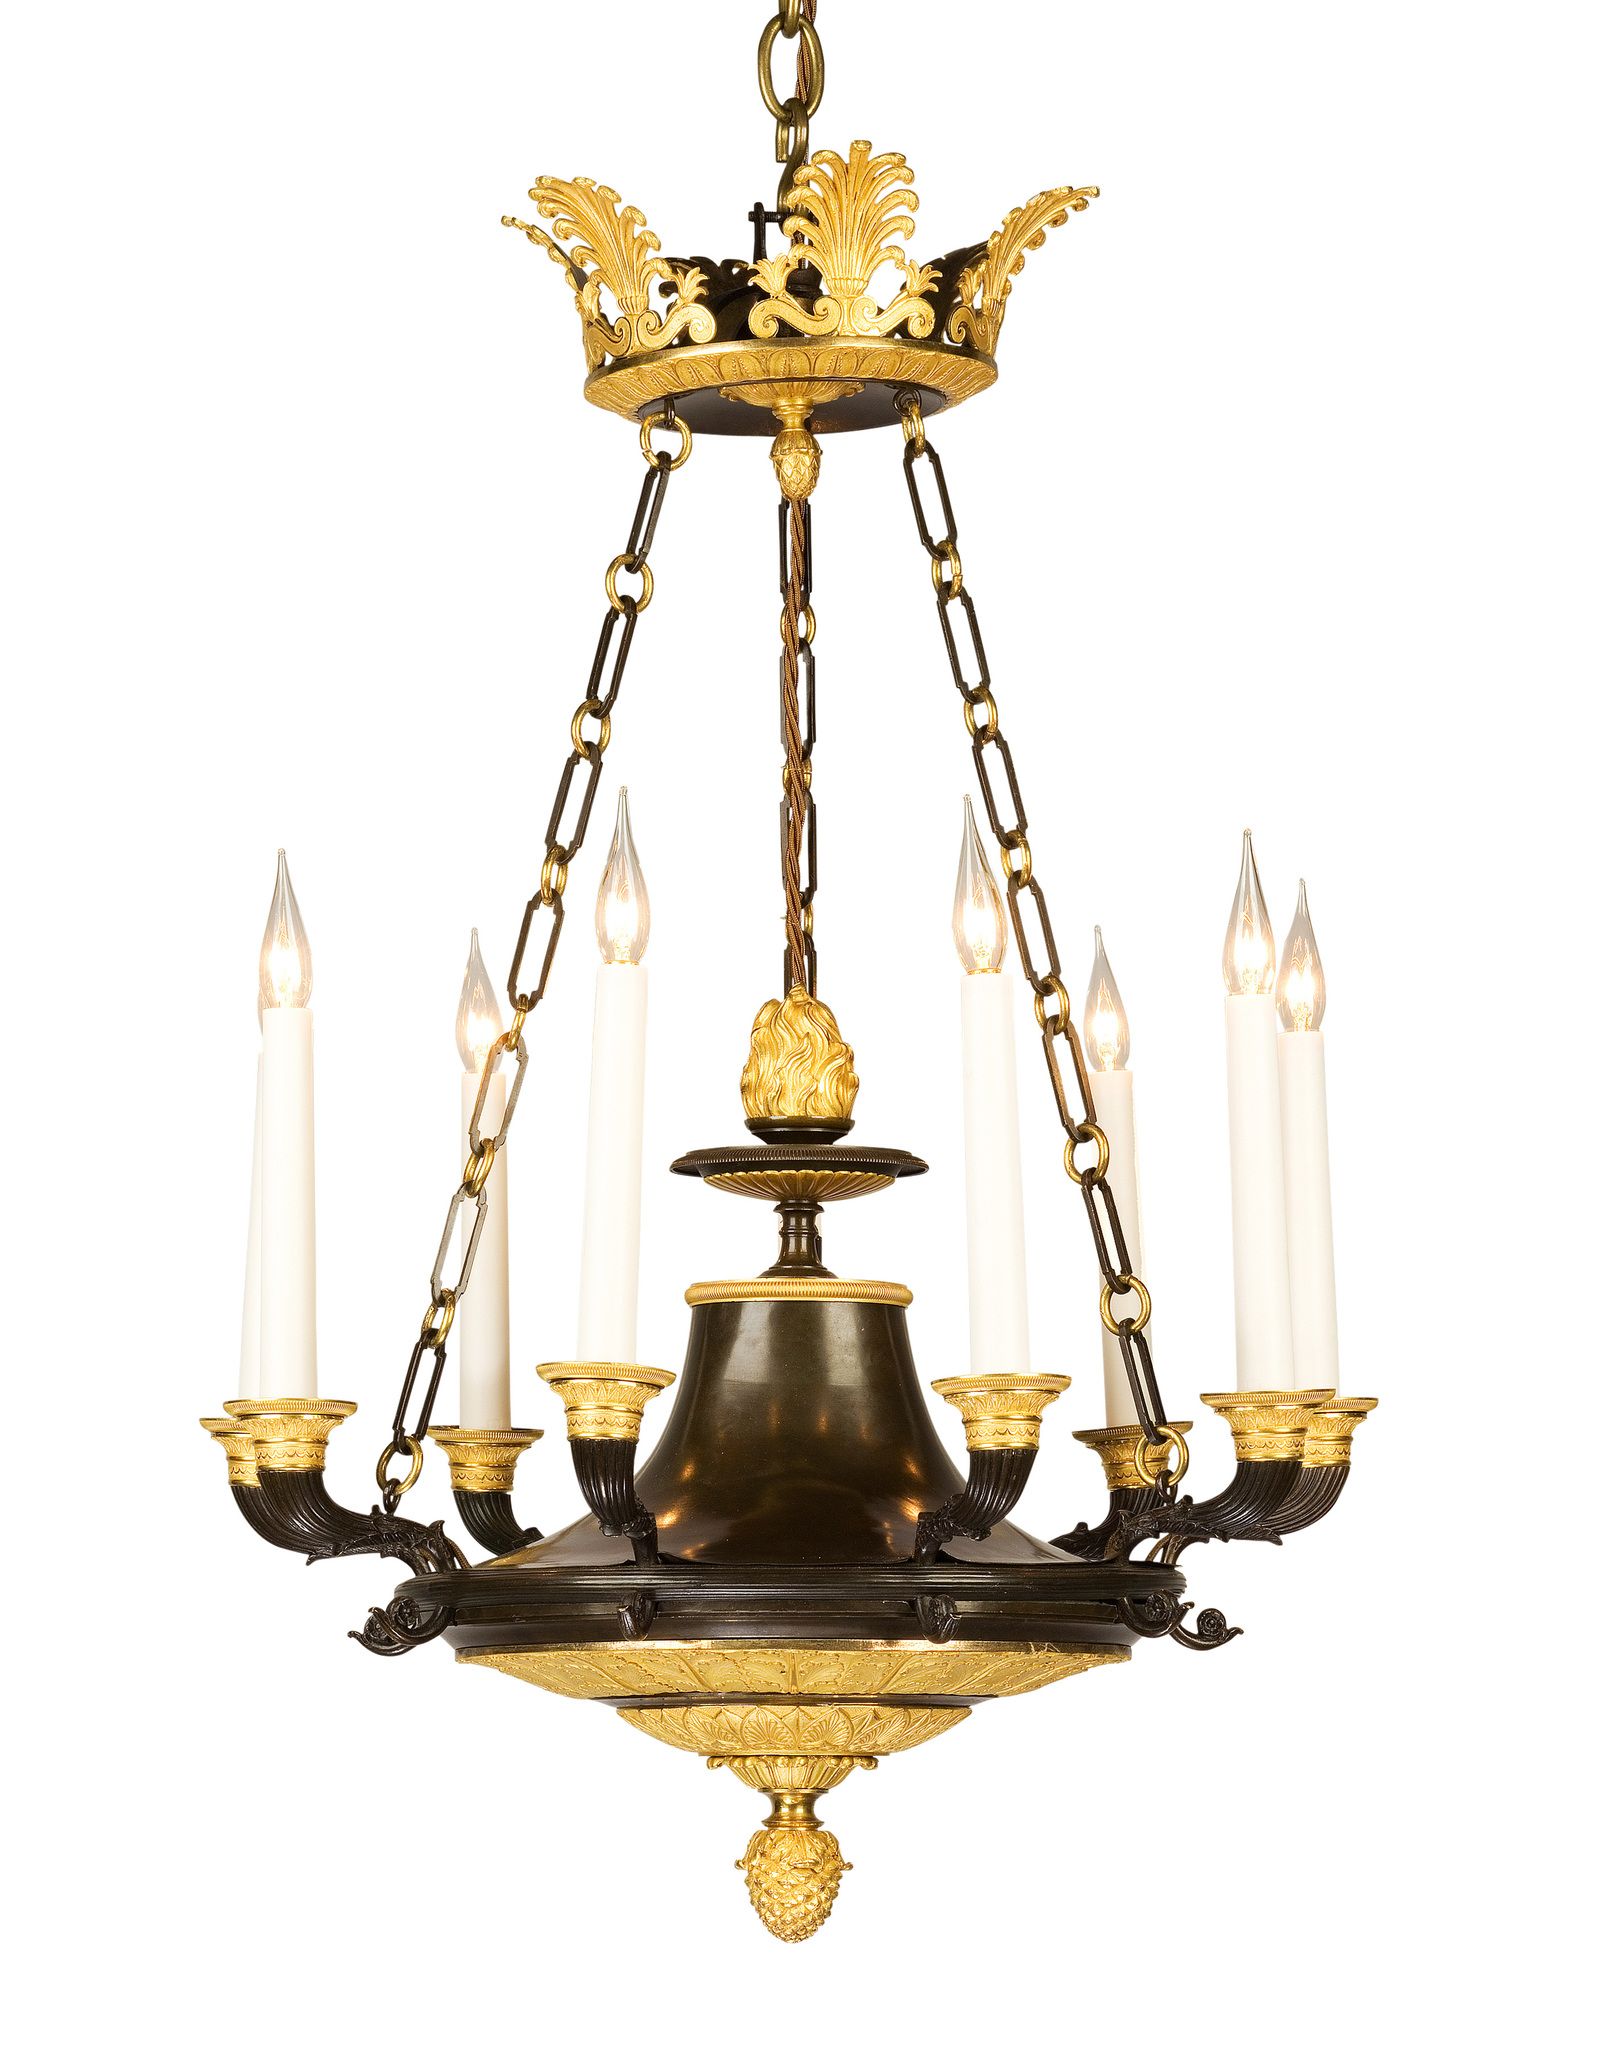 A Bronze and Gilt Empire Chandelier France circa 1810, the canopy is enriched with gilt metal open